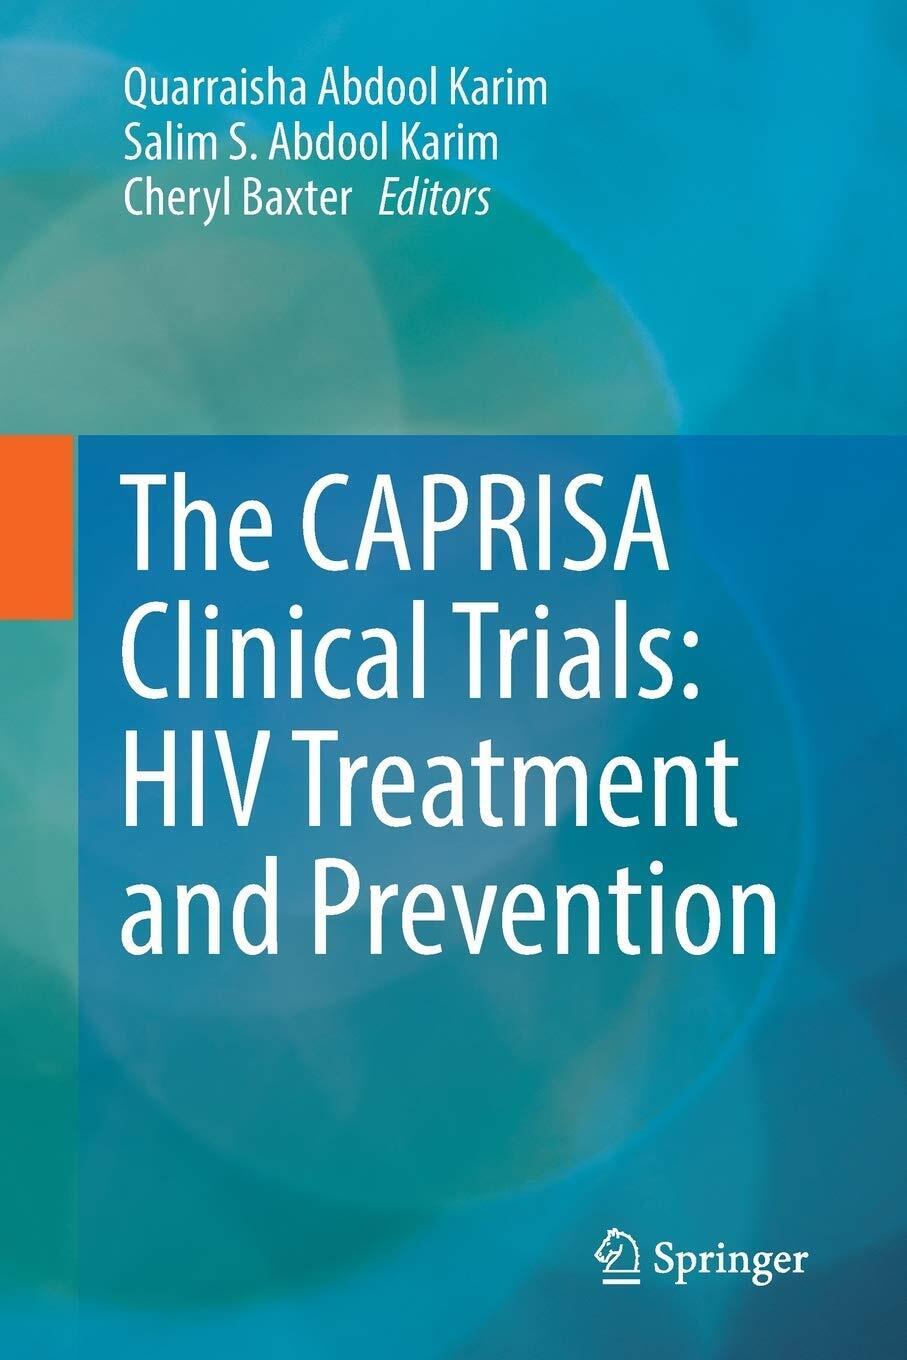 The CAPRISA Clinical Trials: HIV Treatment and Prevention - Springer, 2018